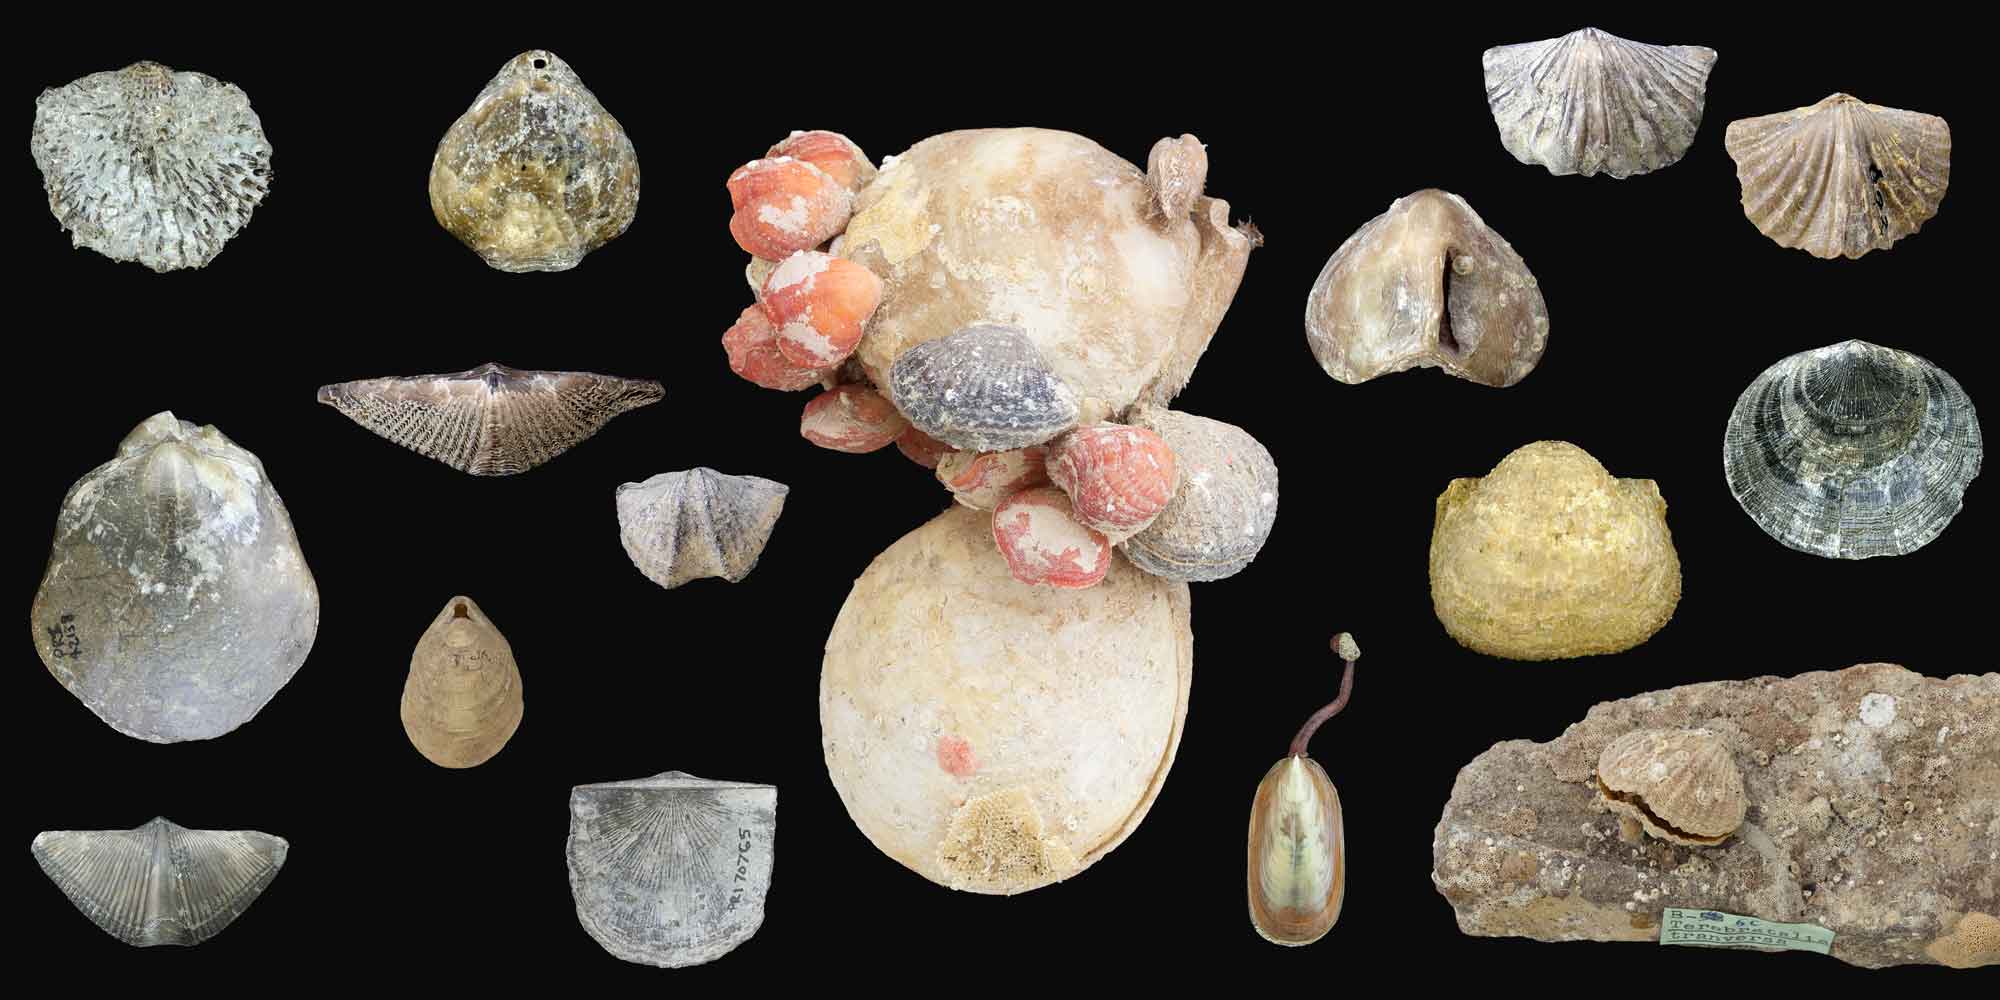 Examples of modern and fossil brachiopod shells